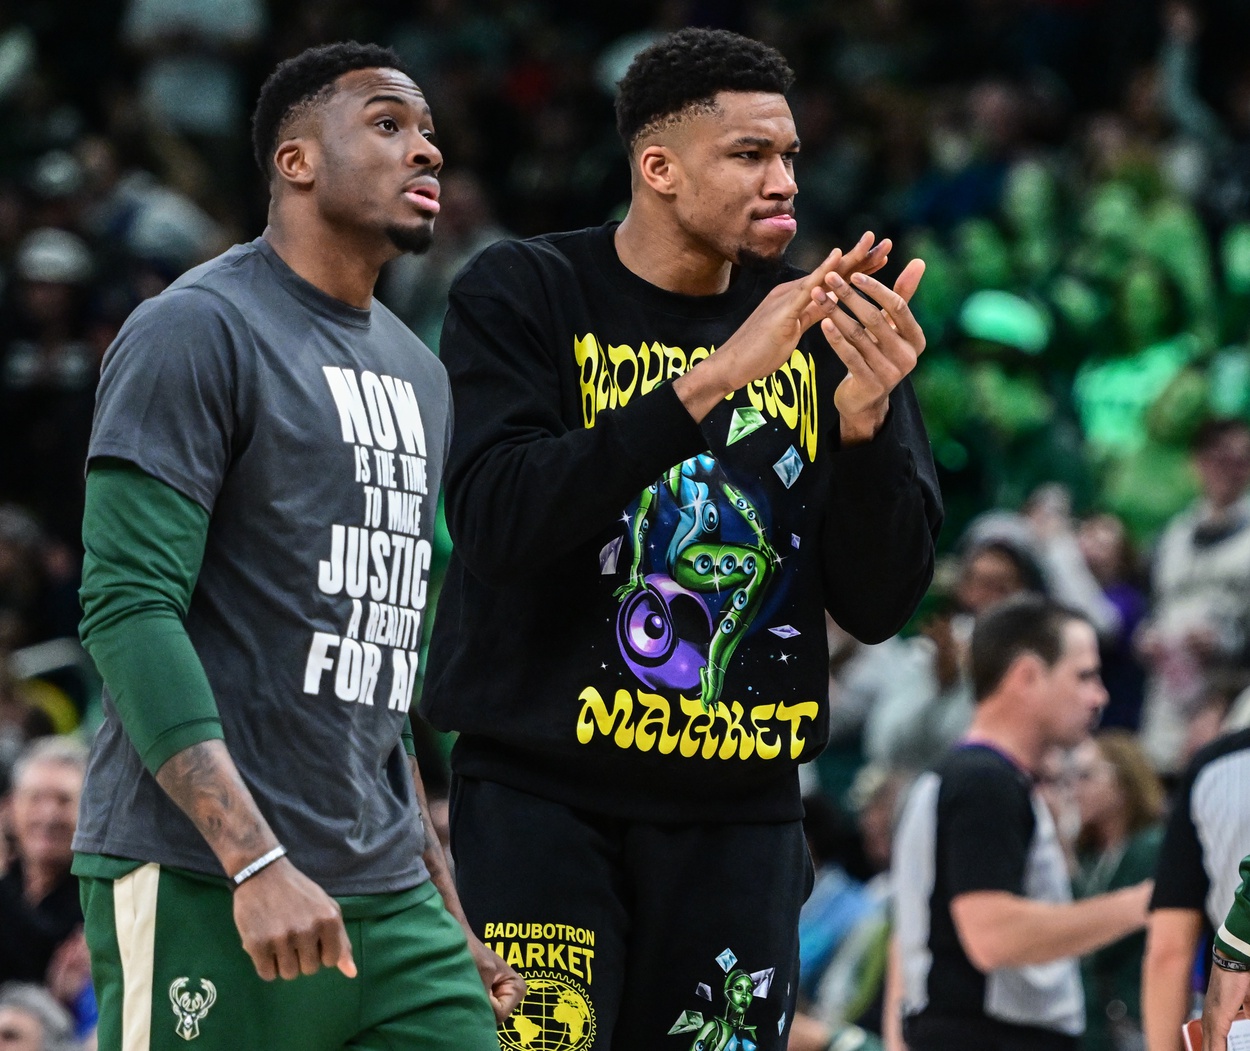 Jan 16, 2023; Milwaukee, Wisconsin, USA; Milwaukee Bucks forward Giannis Antetokounmpo (right) cheers from the bench in the fourth quarter during game against the Indiana Pacers at Fiserv Forum. Antetokounmpo did not play due to an injury. Mandatory Credit: Benny Sieu-USA TODAY Sports